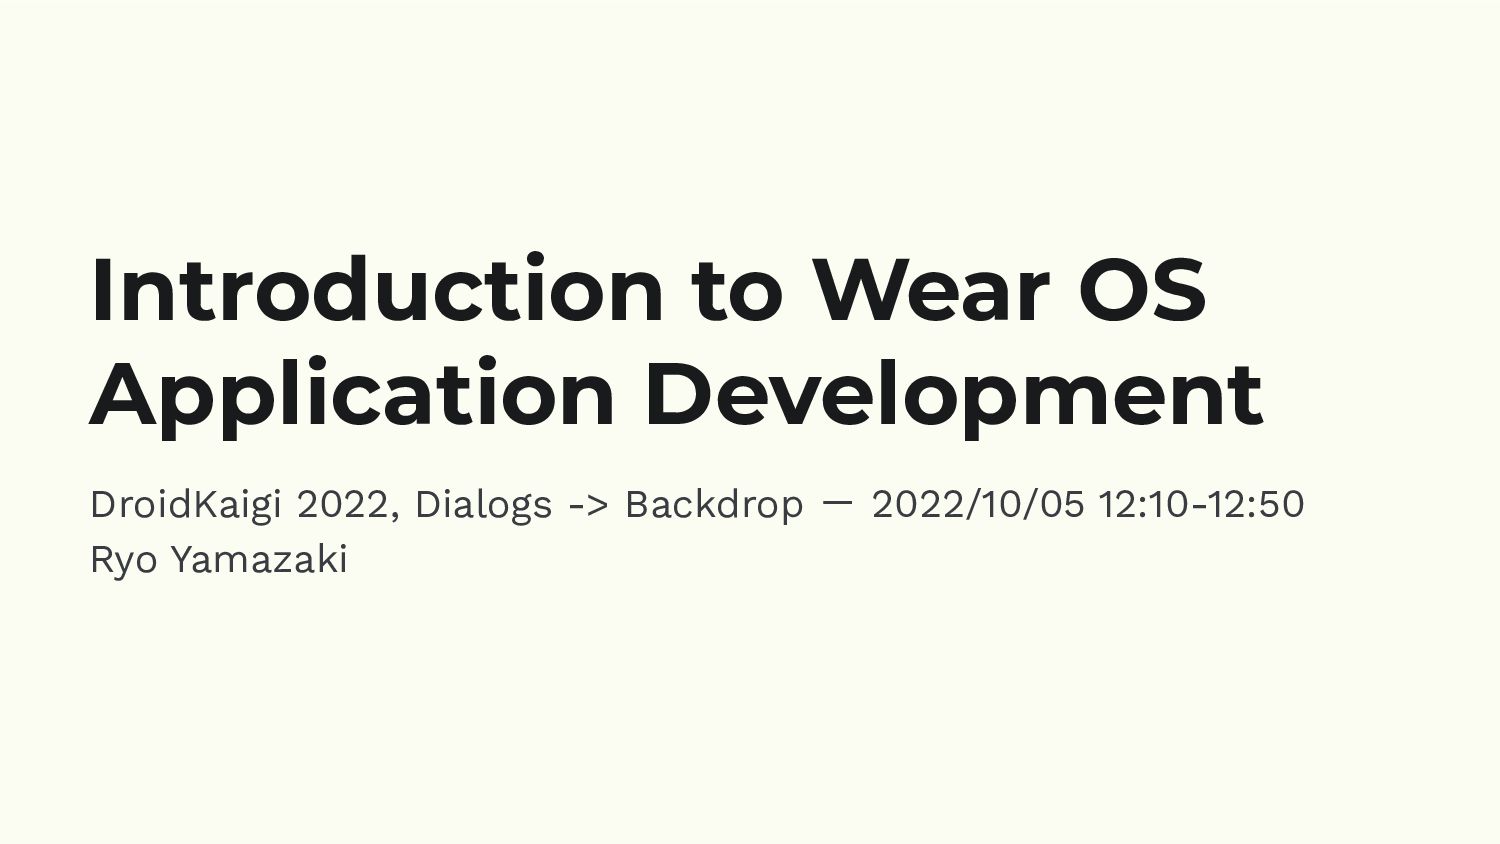 Introduction to Wear OS Application Development